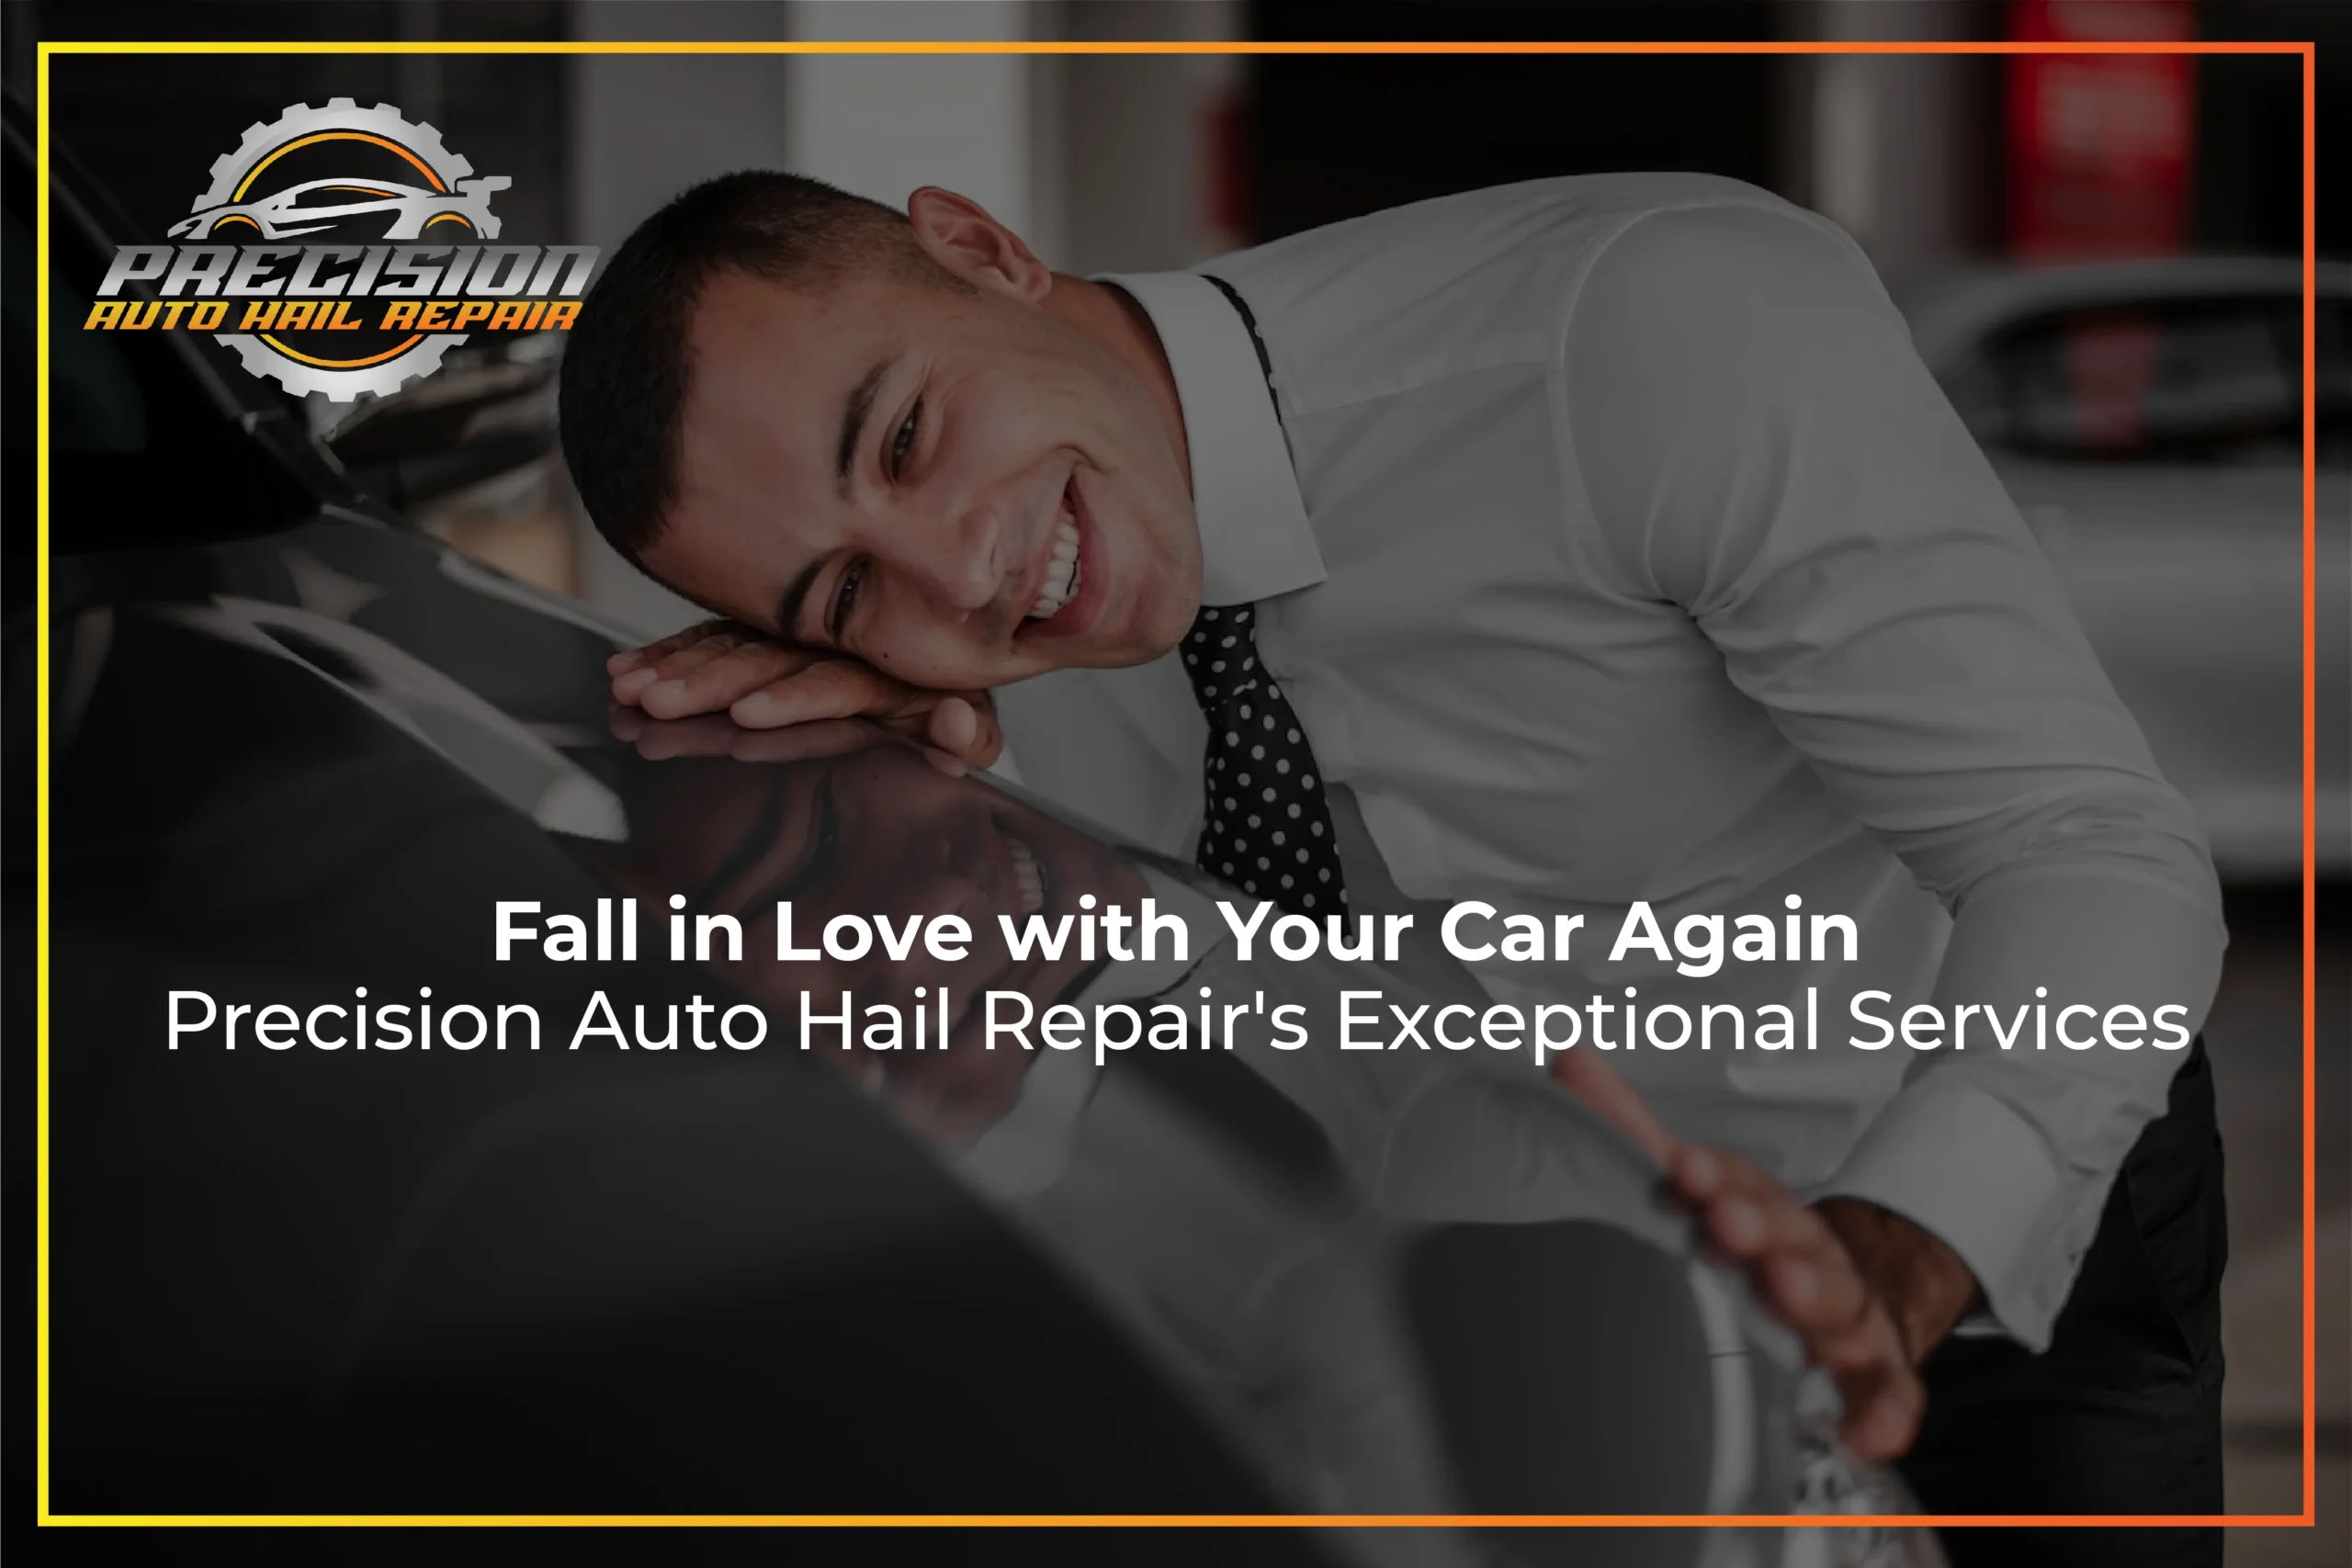 Fall in Love with Your Car Again